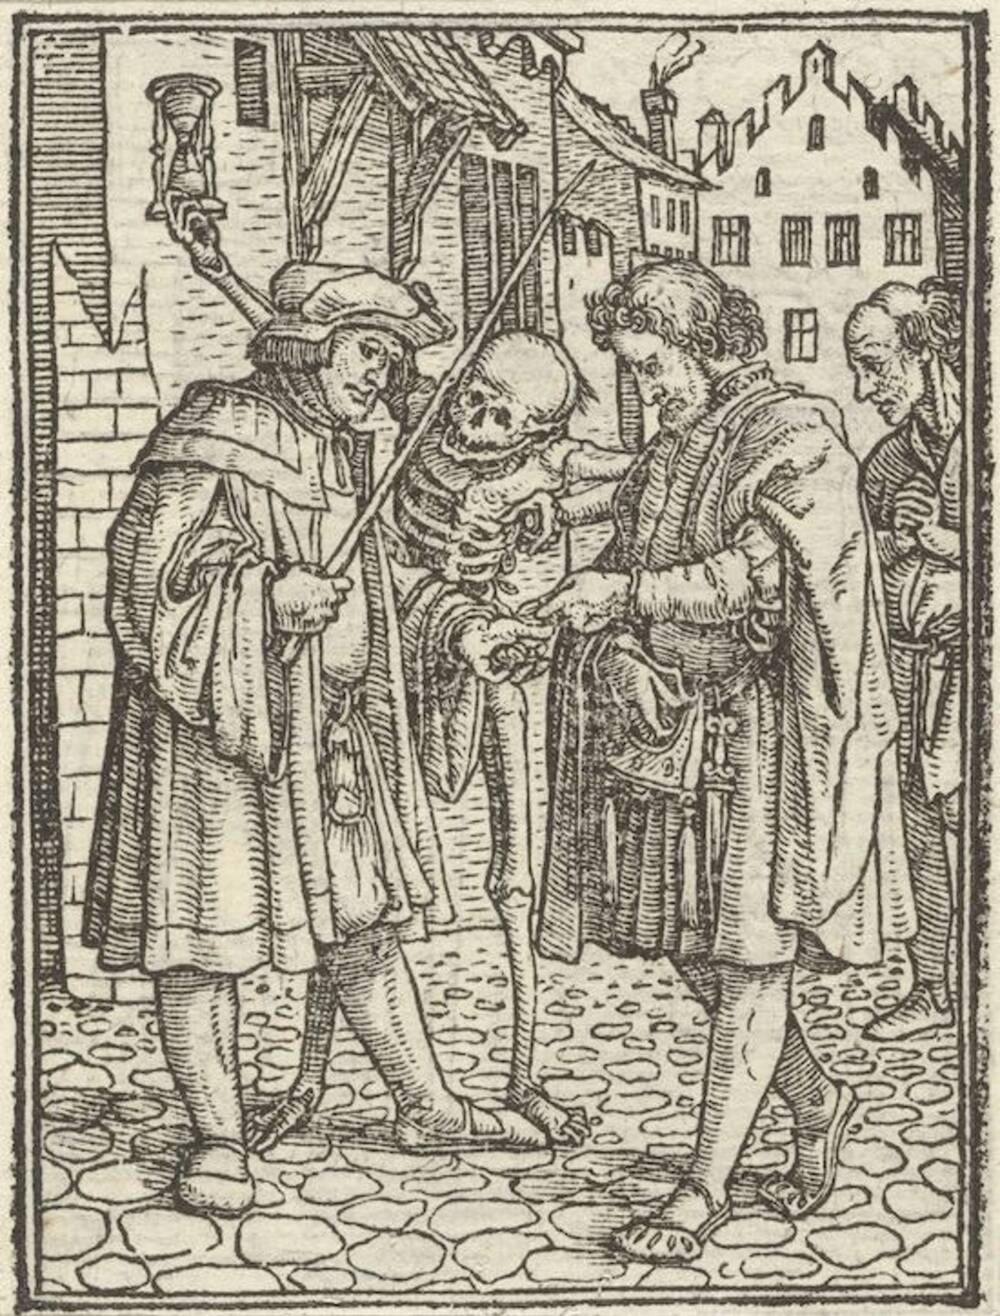 An old illustration of two men in medieval dress standing on a cobbled street, with a skeleton standing between them.